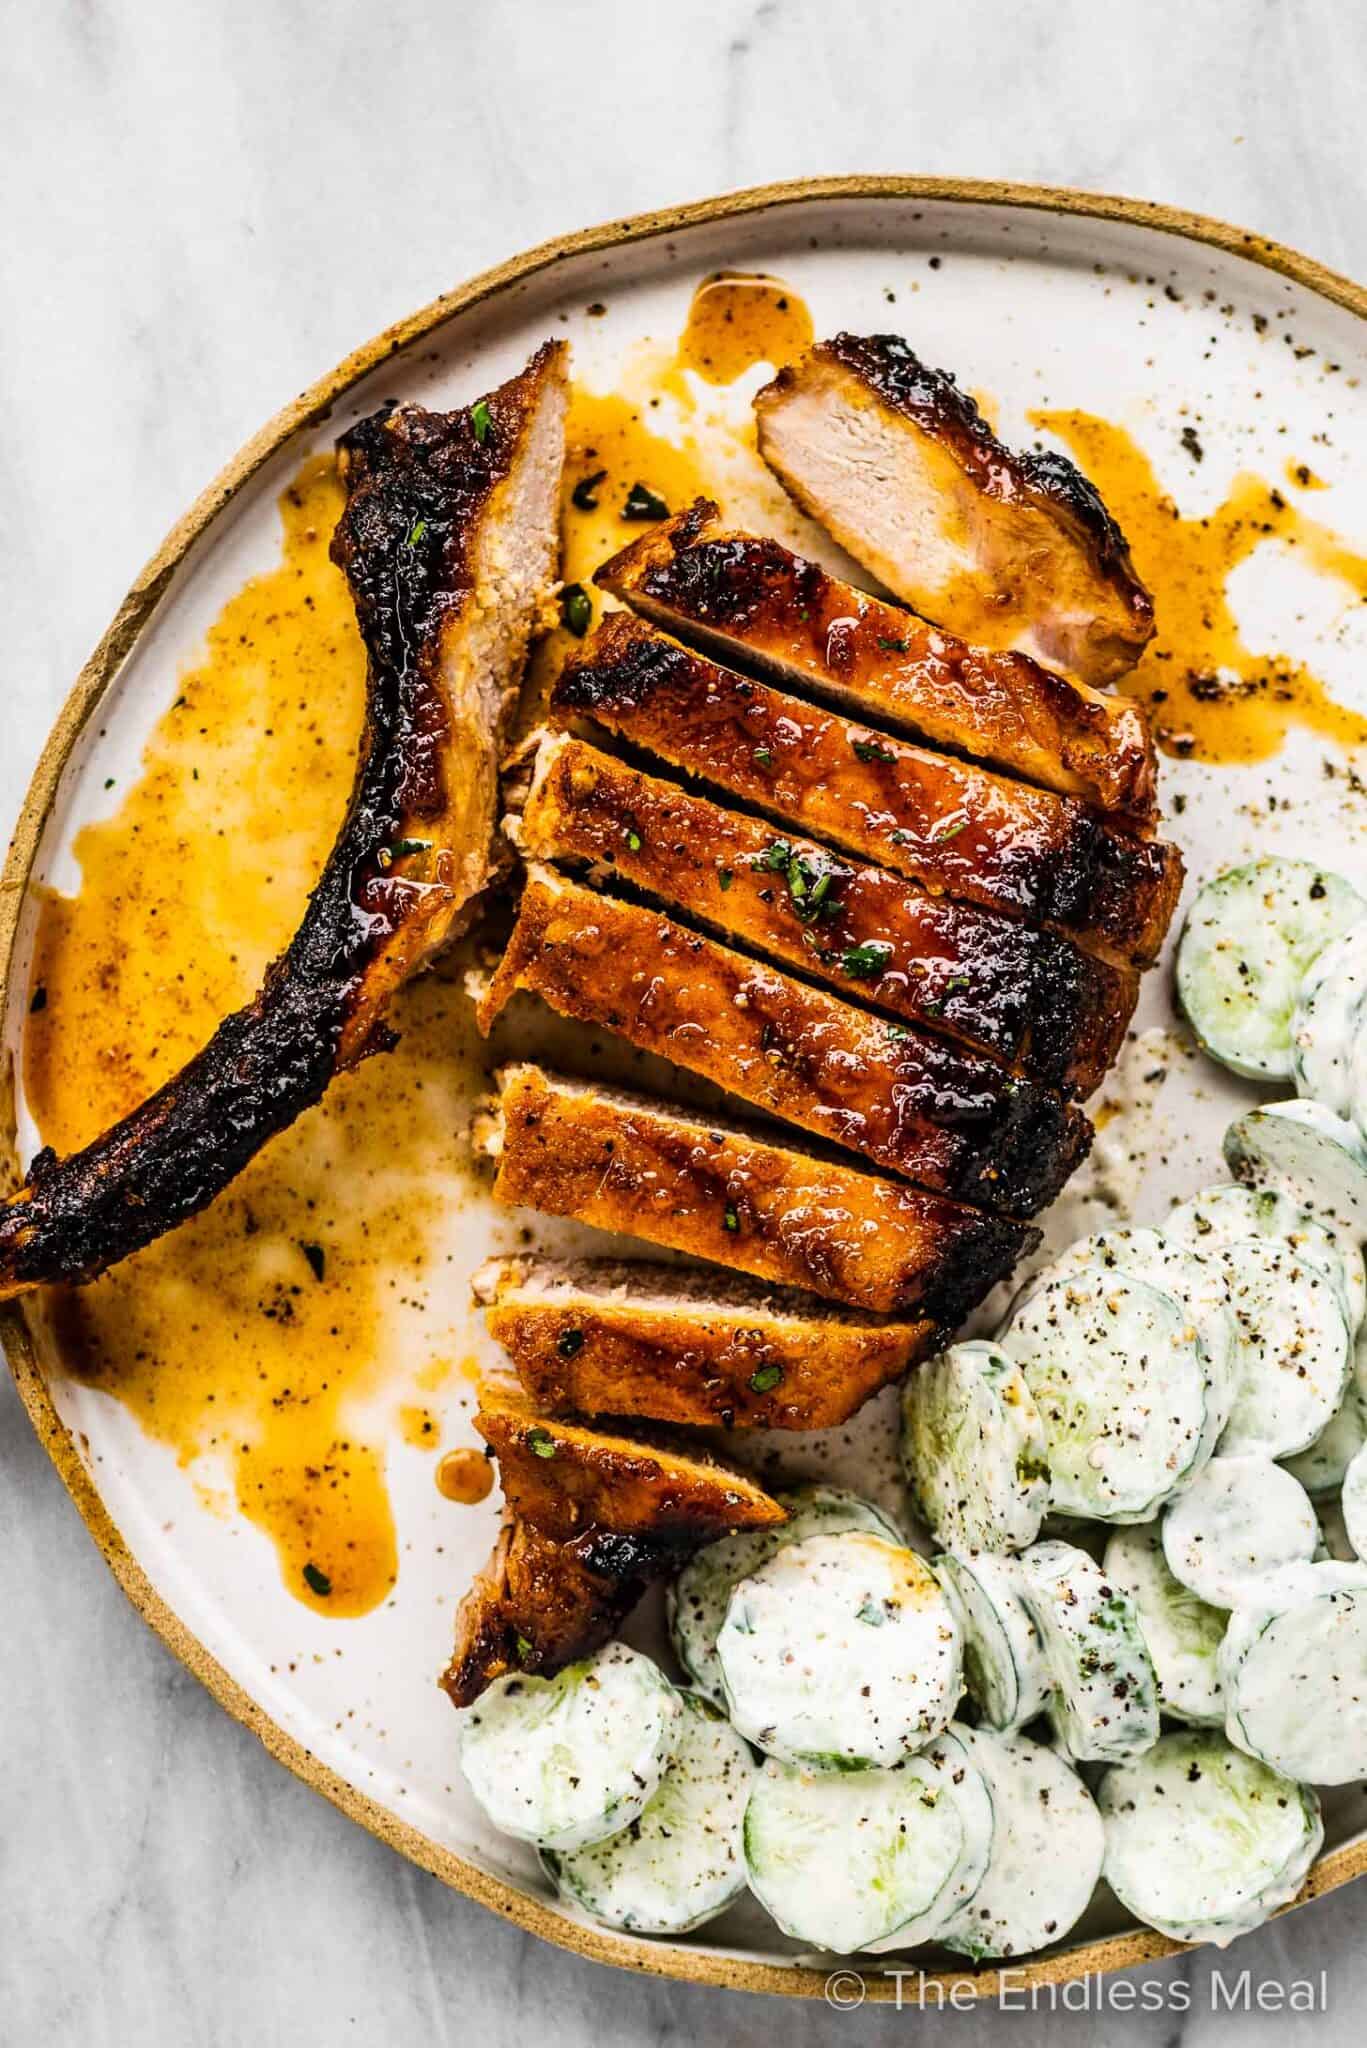 A tomahawk pork chop with honey garlic sauce sliced on a plate with cucumber salad.